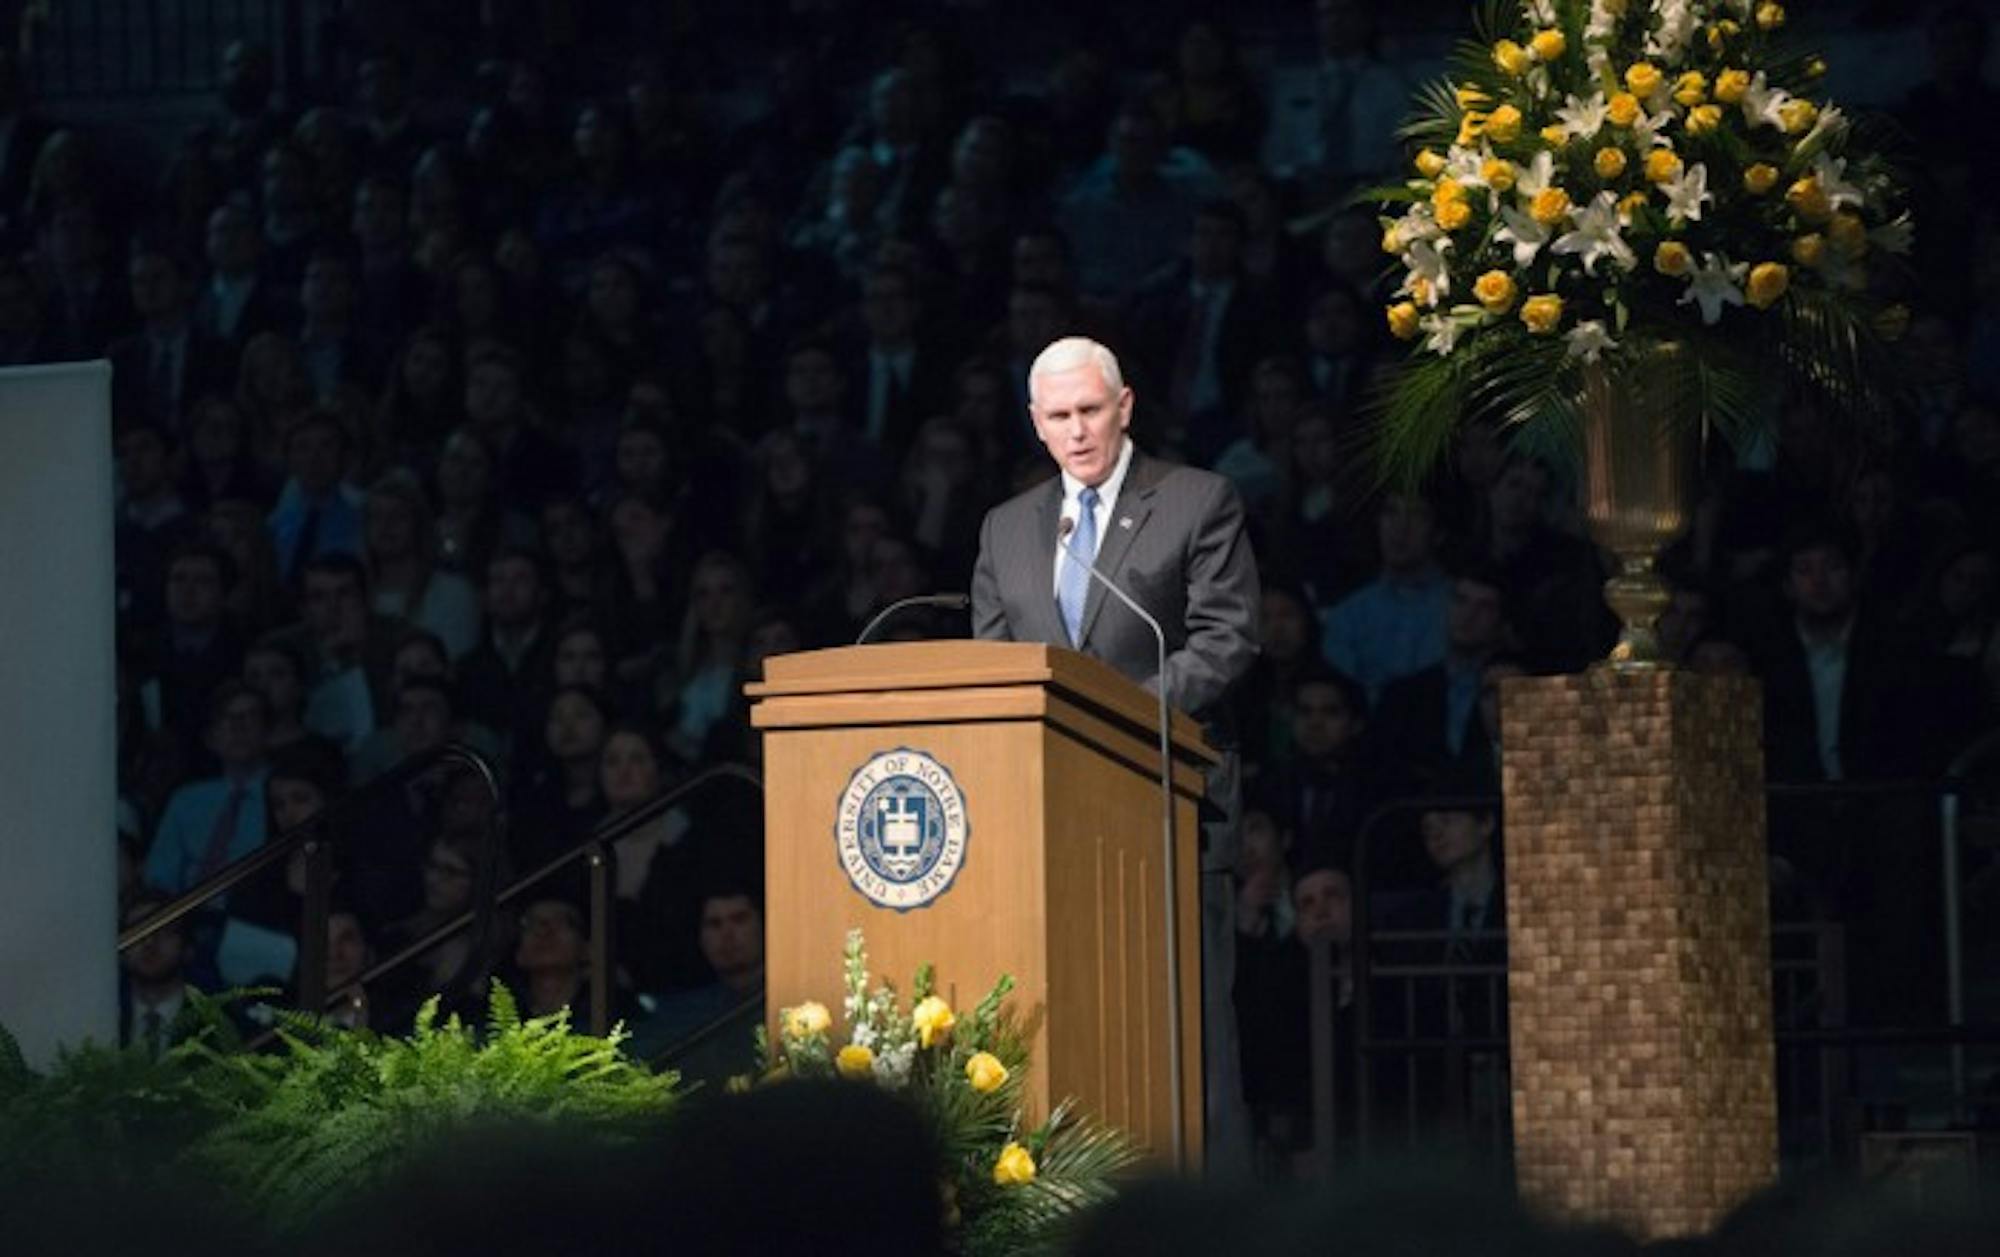 Mike Pence speaks in Purcell Pavilion at a 2015 memorial service for Fr. Theodore Hesburgh, who served as the University's 15th president. Pence will address students at this year's May 21st commencement.